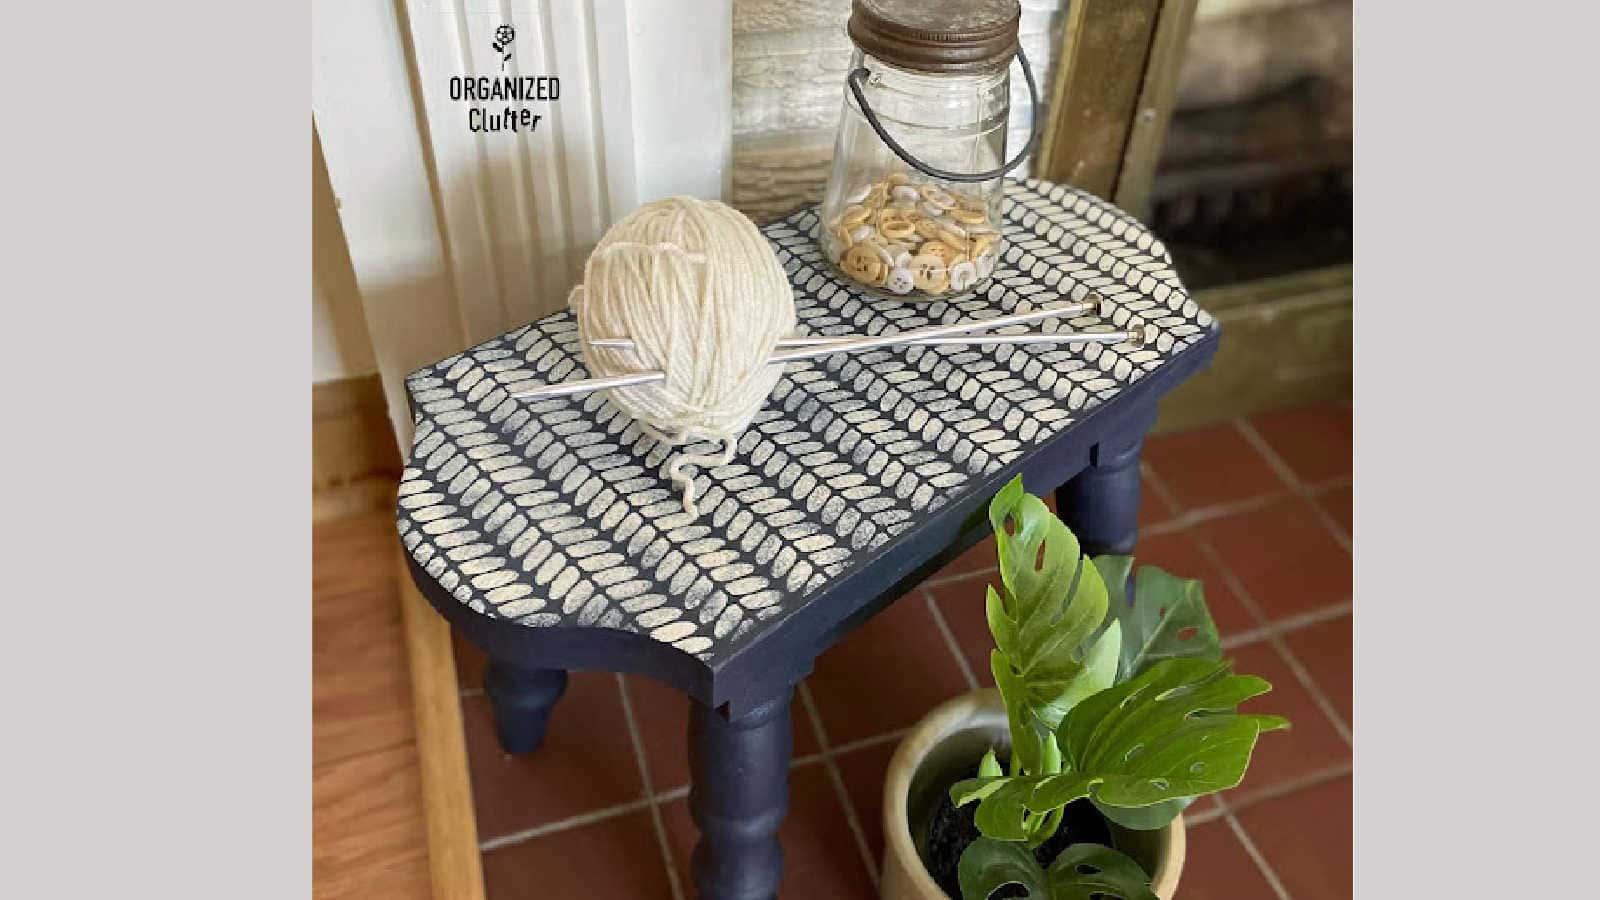 knitted pattern stencil on a stool